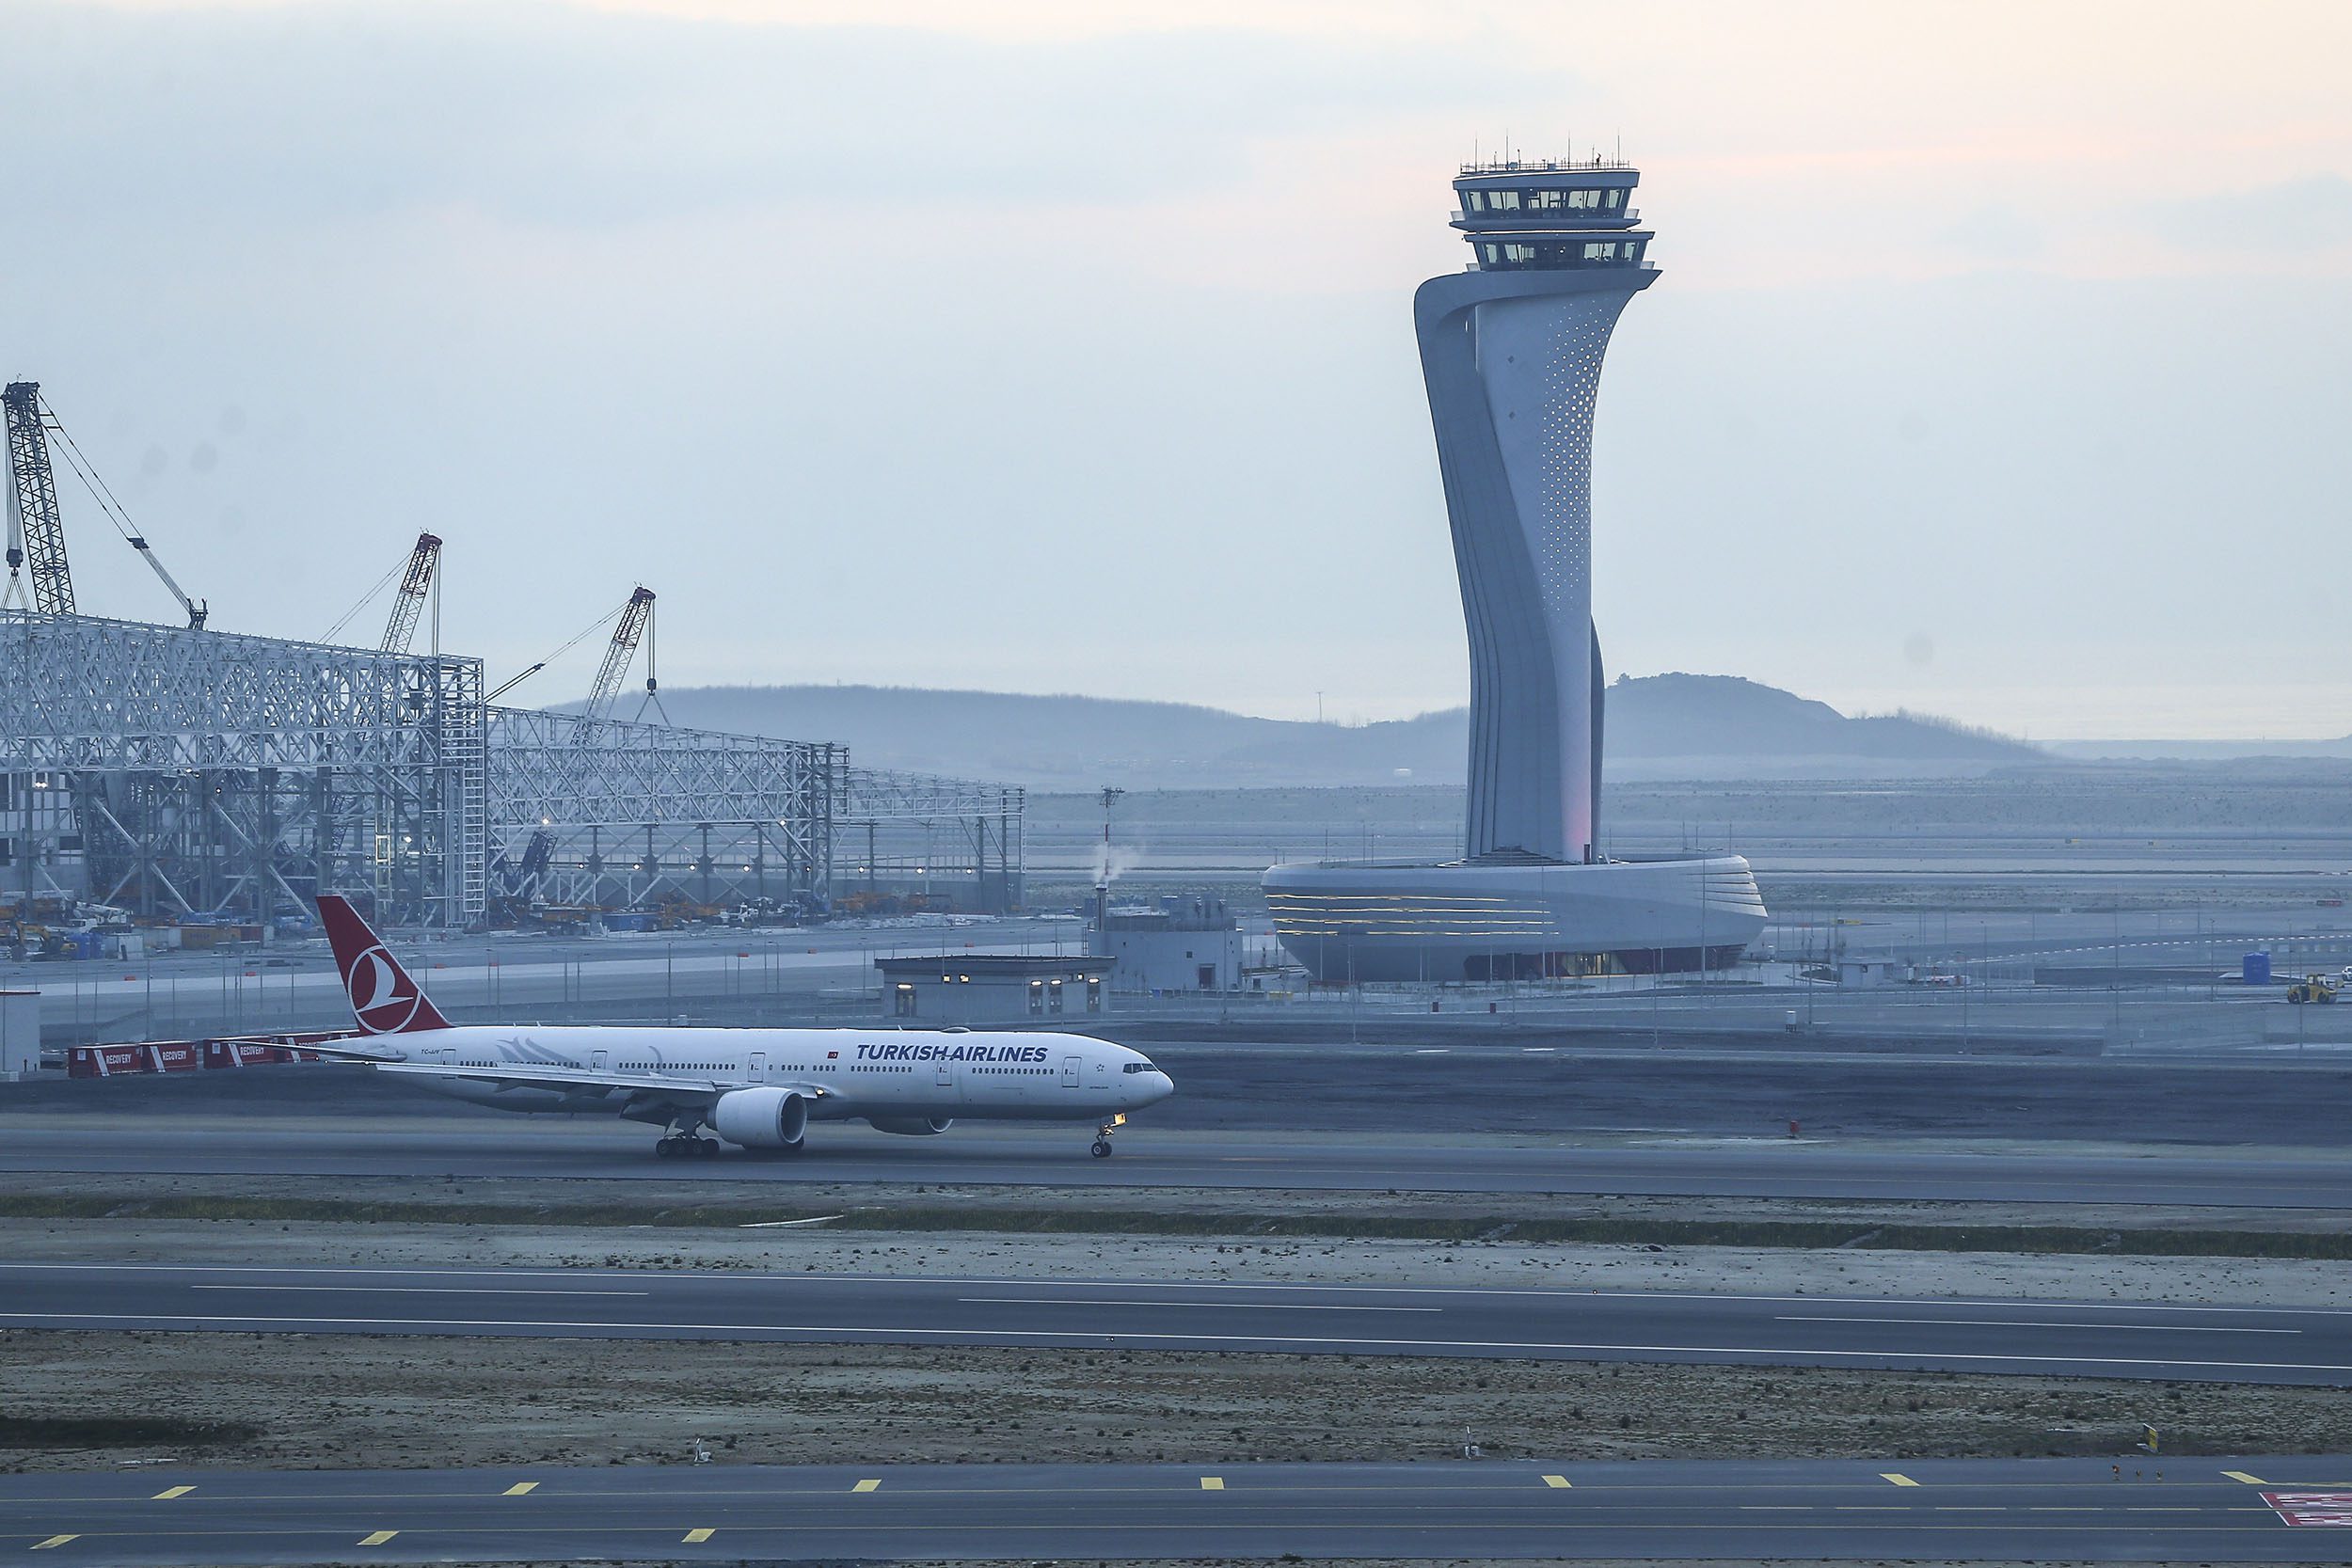 Strong facilities, services help Istanbul Airport outdo most European hubs